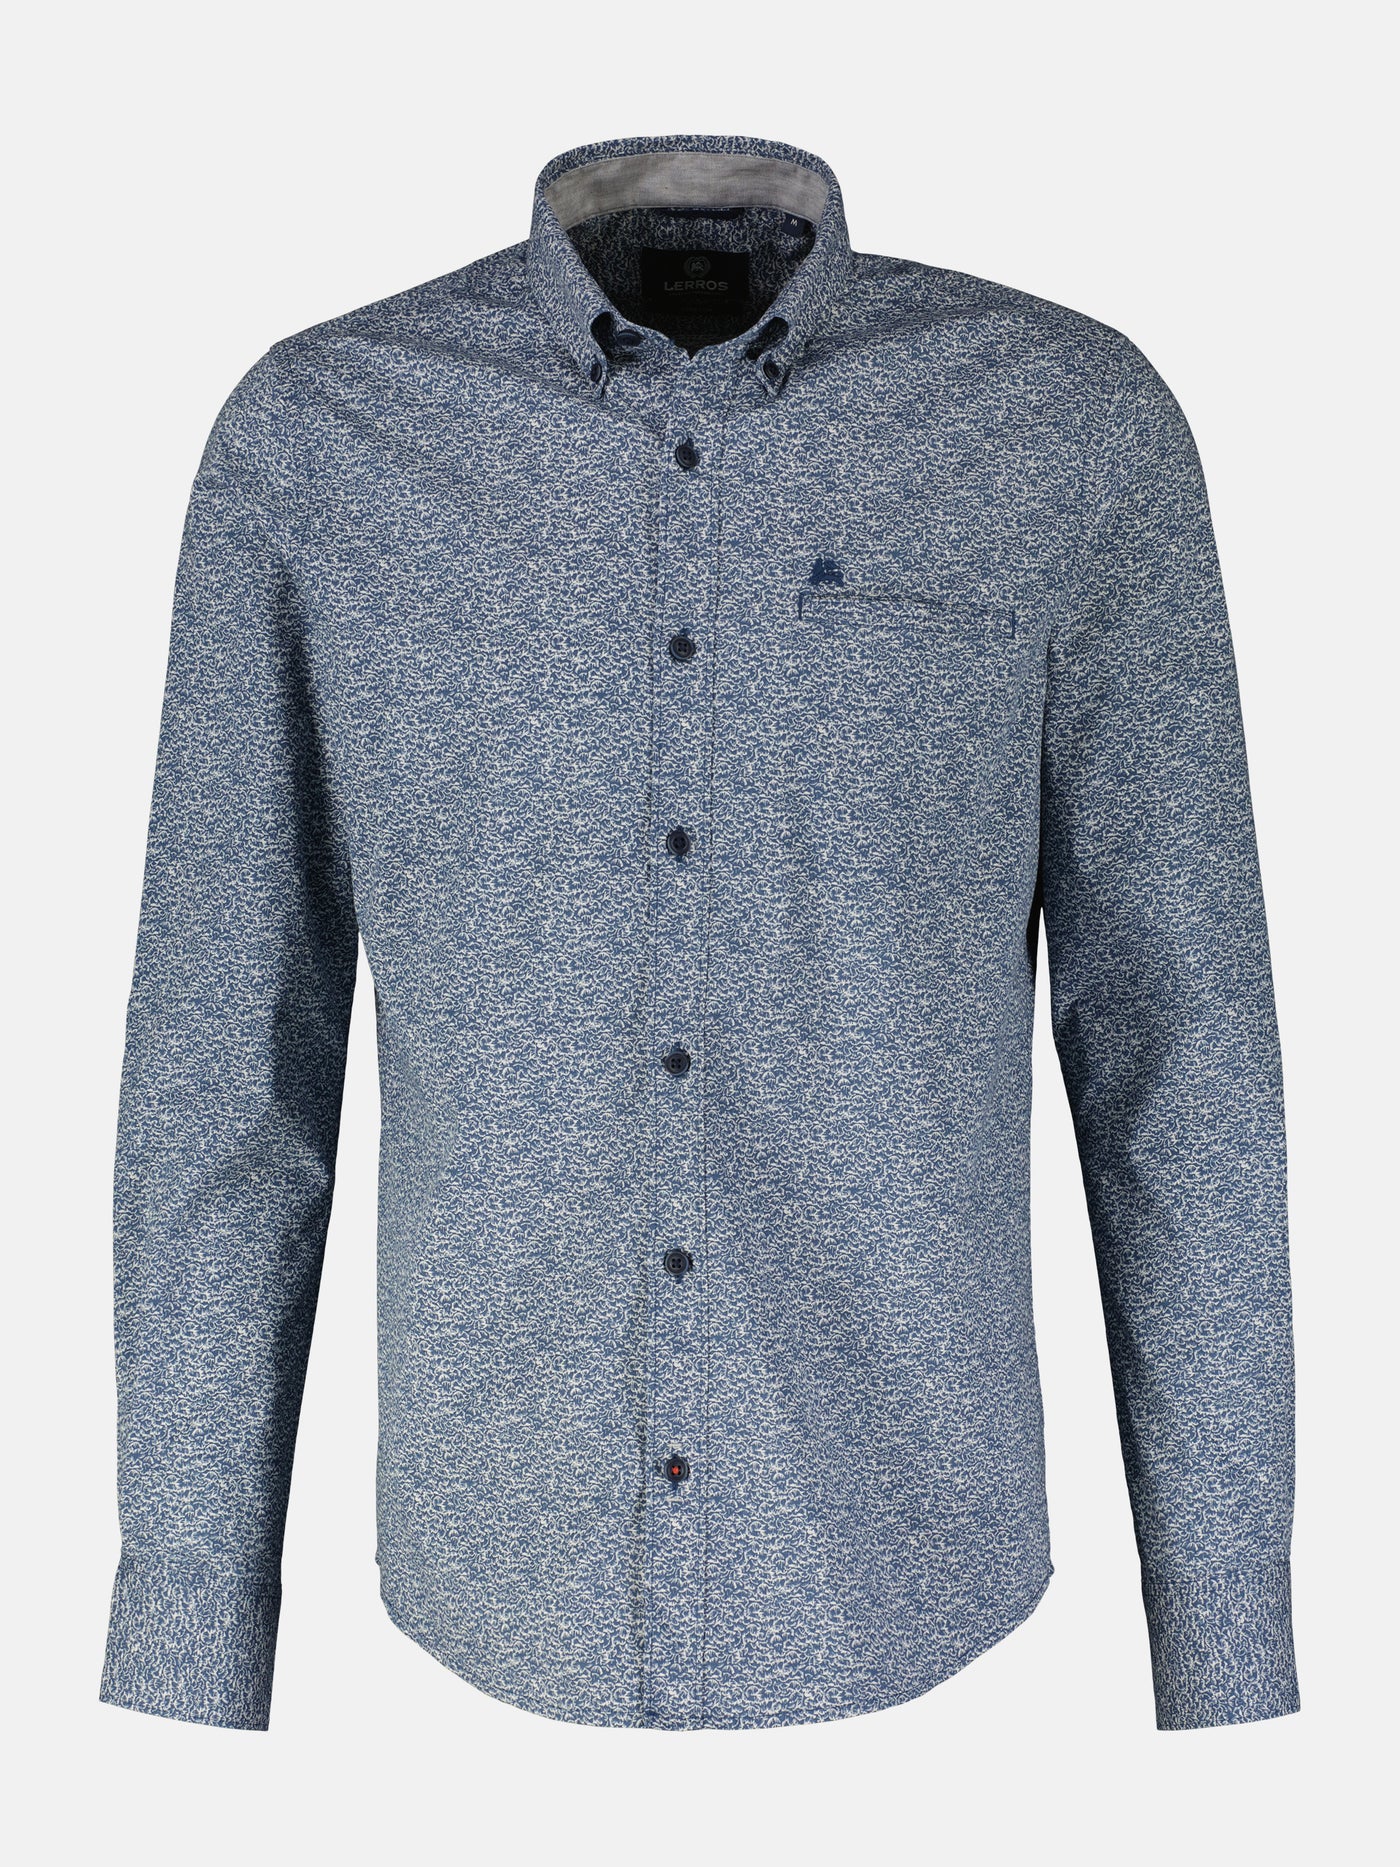 Poplin shirt with all-over print